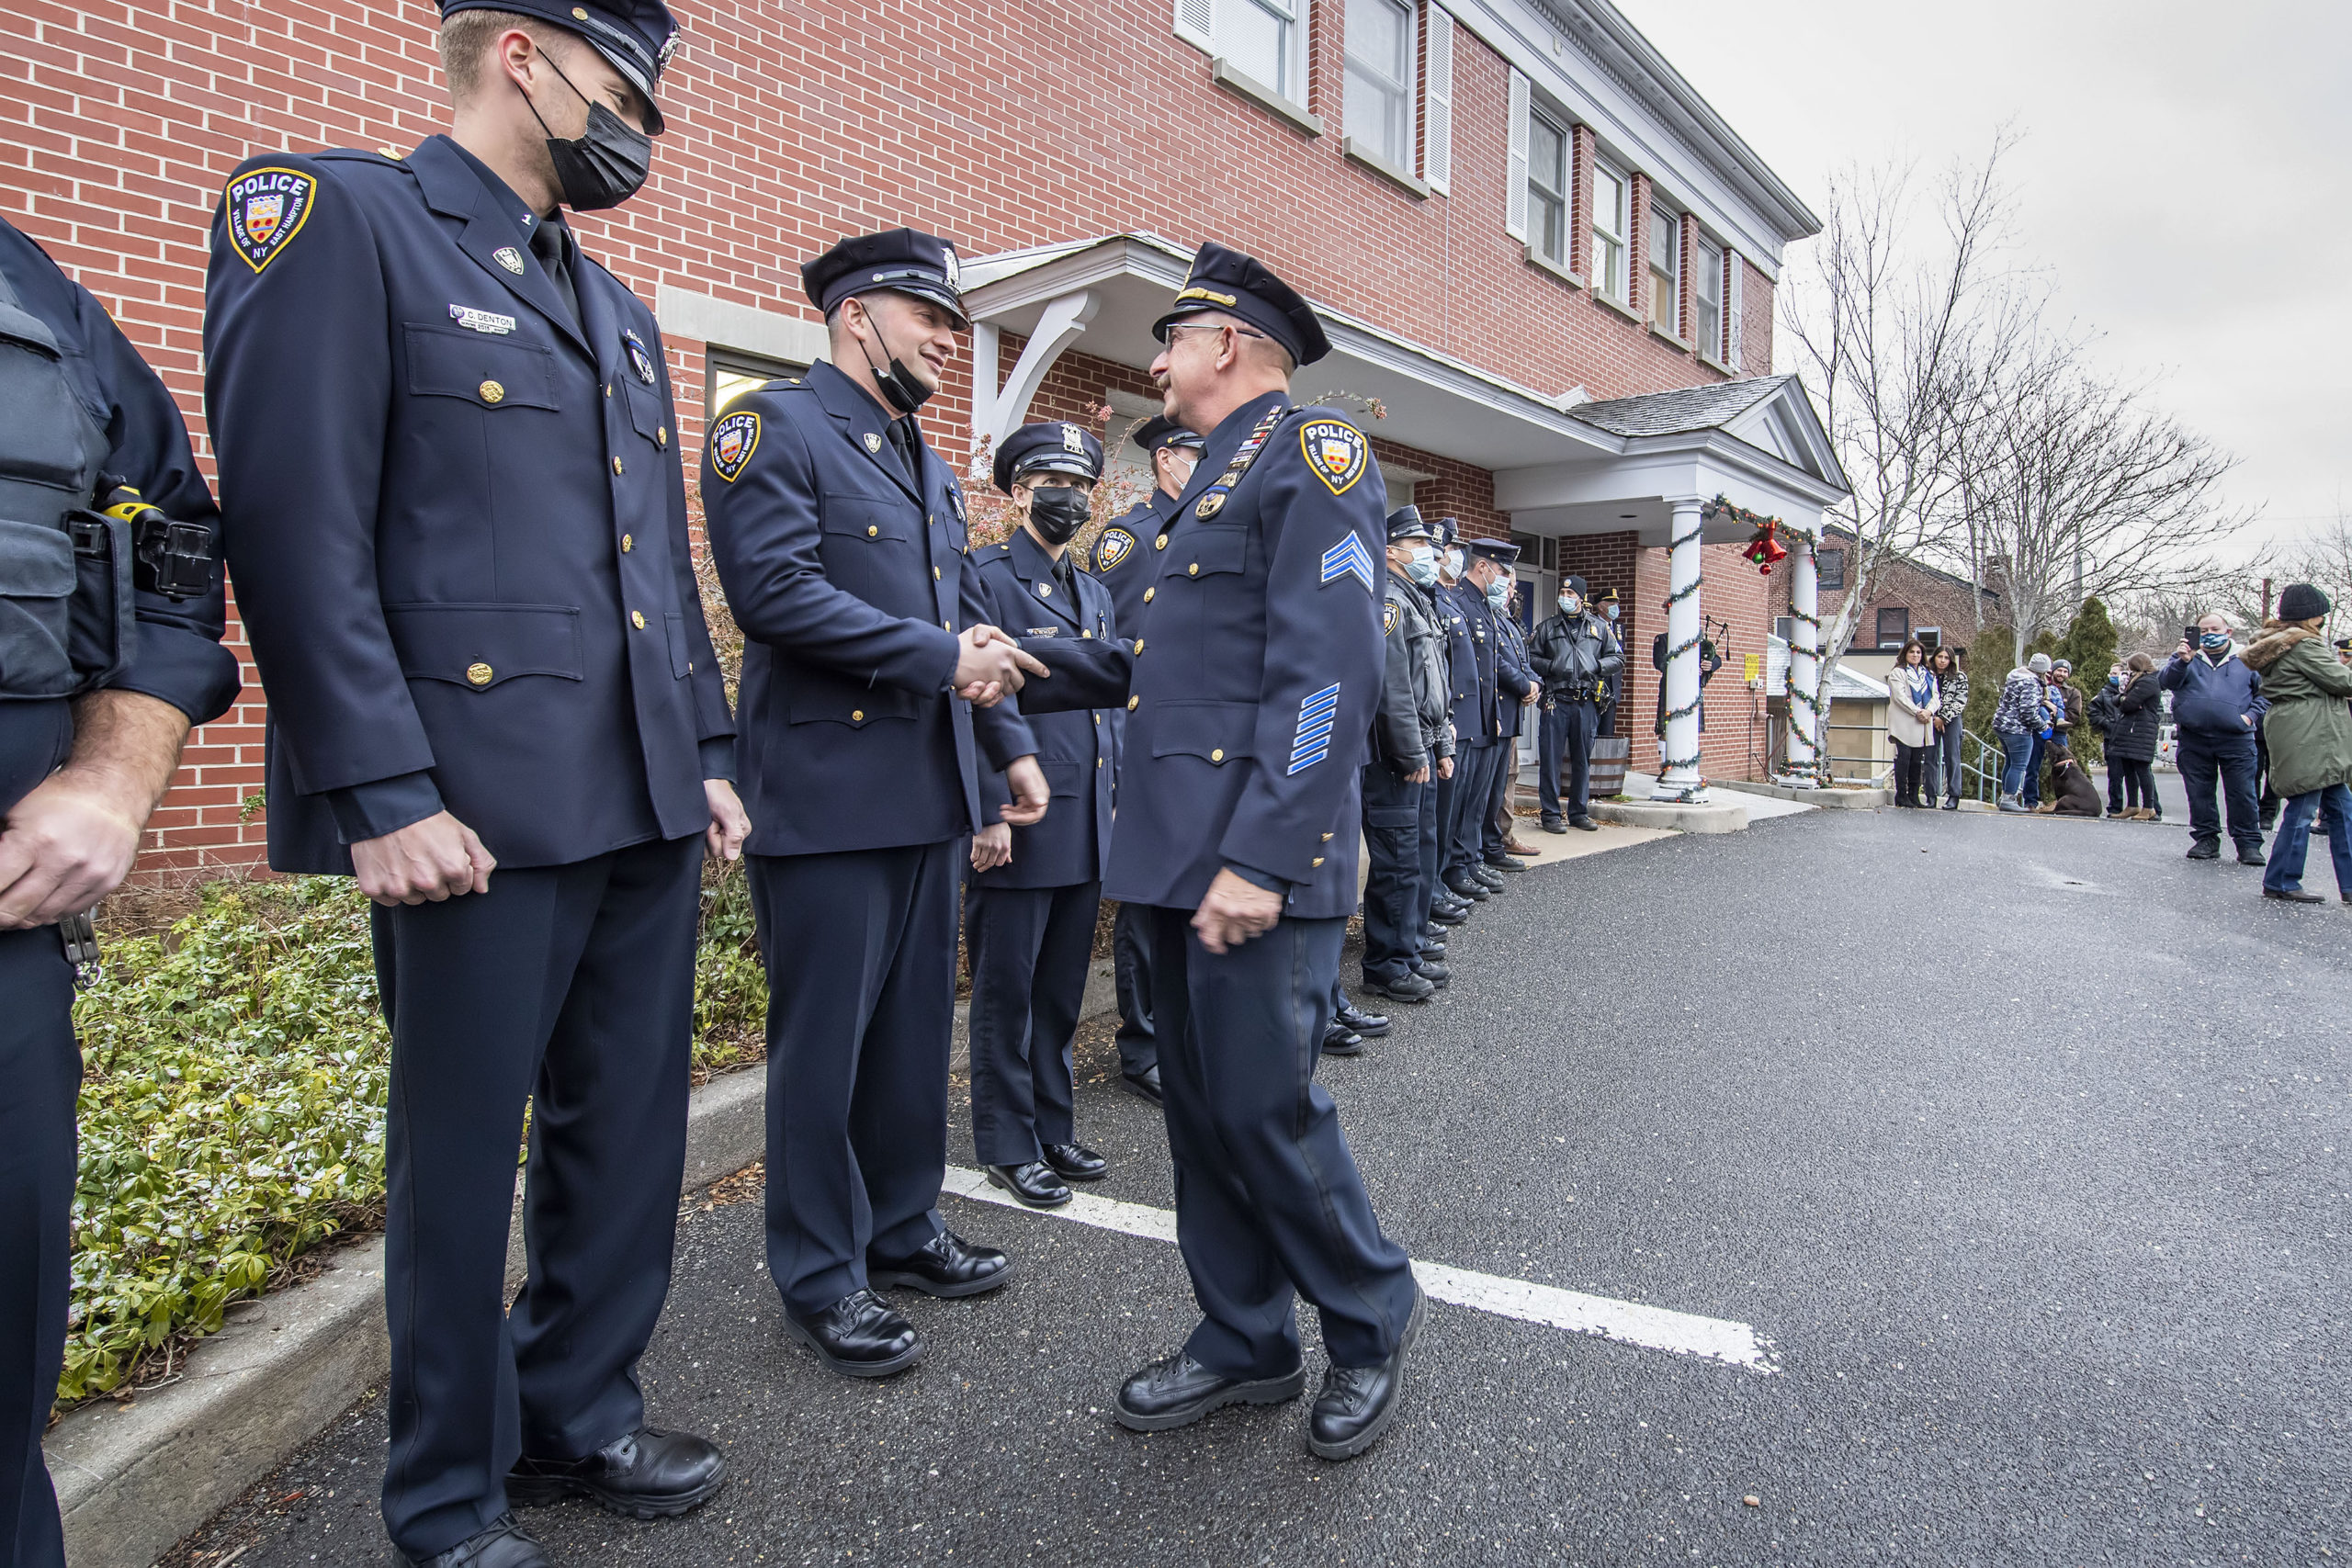 Each of his fellow officers was thanked in turn during the 